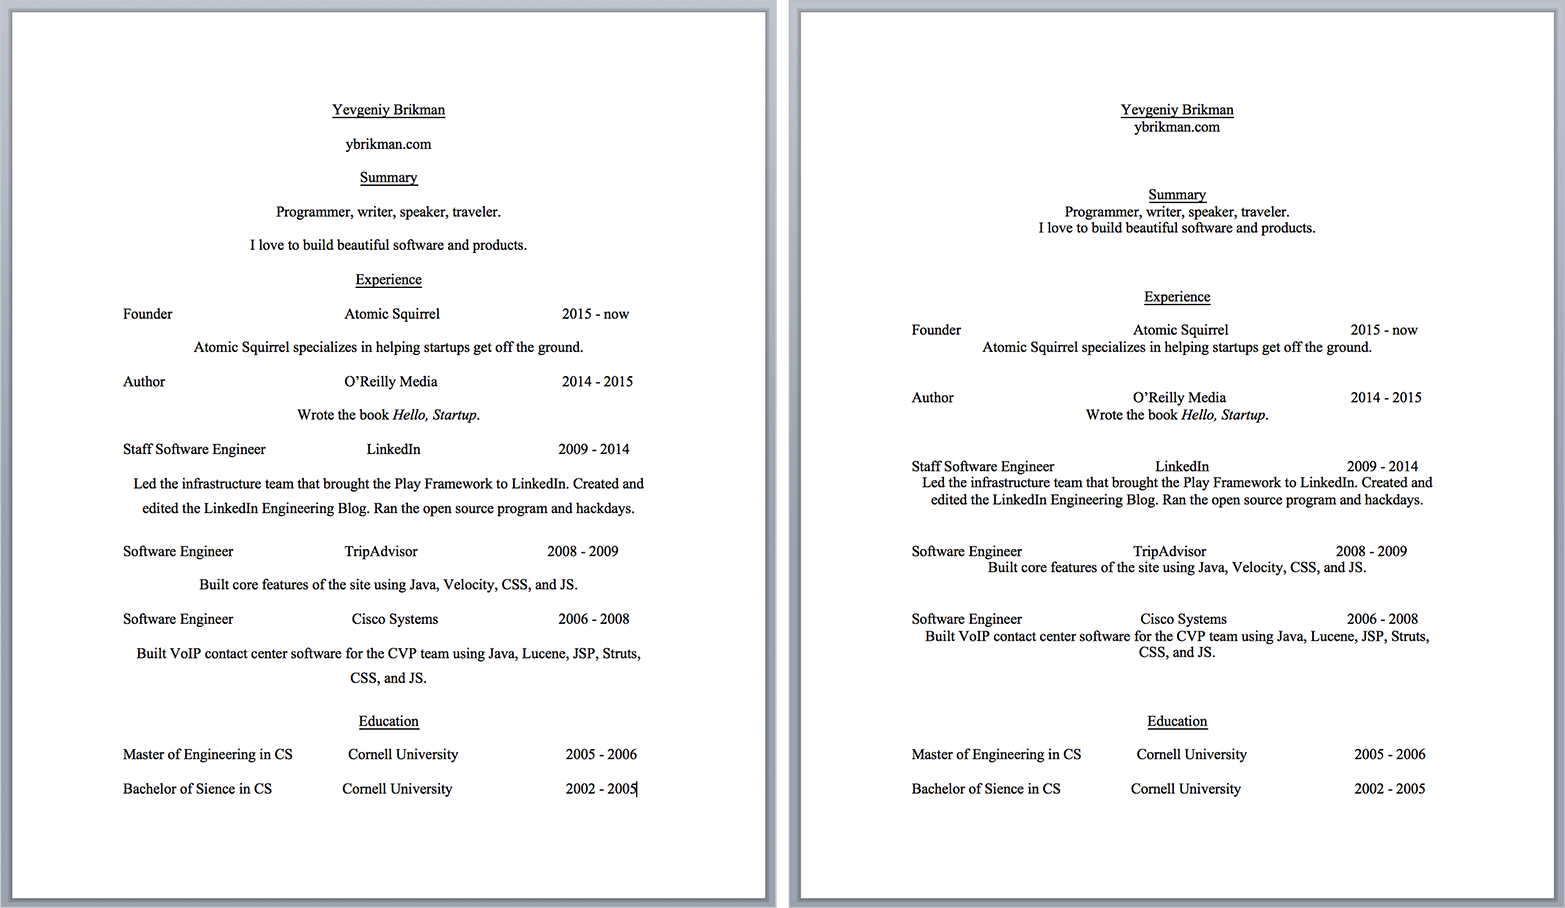 The original resume on the left, and the same resume, but with better use of proximity, on the right